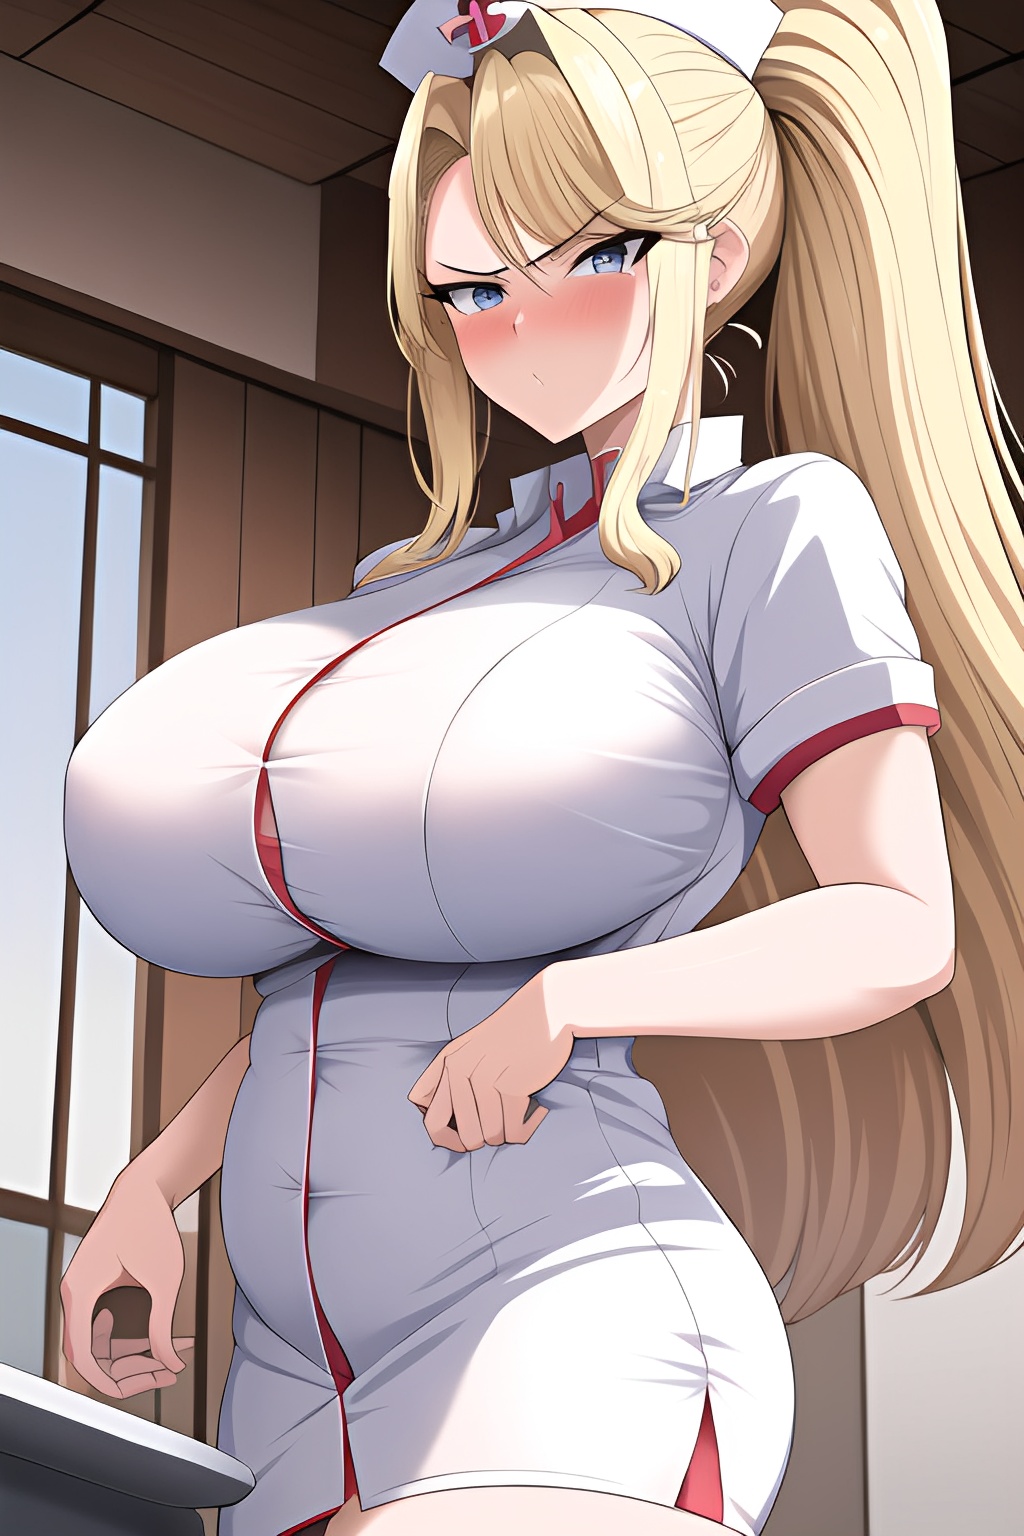 60s Animated Porn - Anime Busty Huge Boobs 60s Age Angry Face Blonde Slicked Hair Style Light  Skin Comic Yacht Close Up View Bathing Nurse - AI Hentai